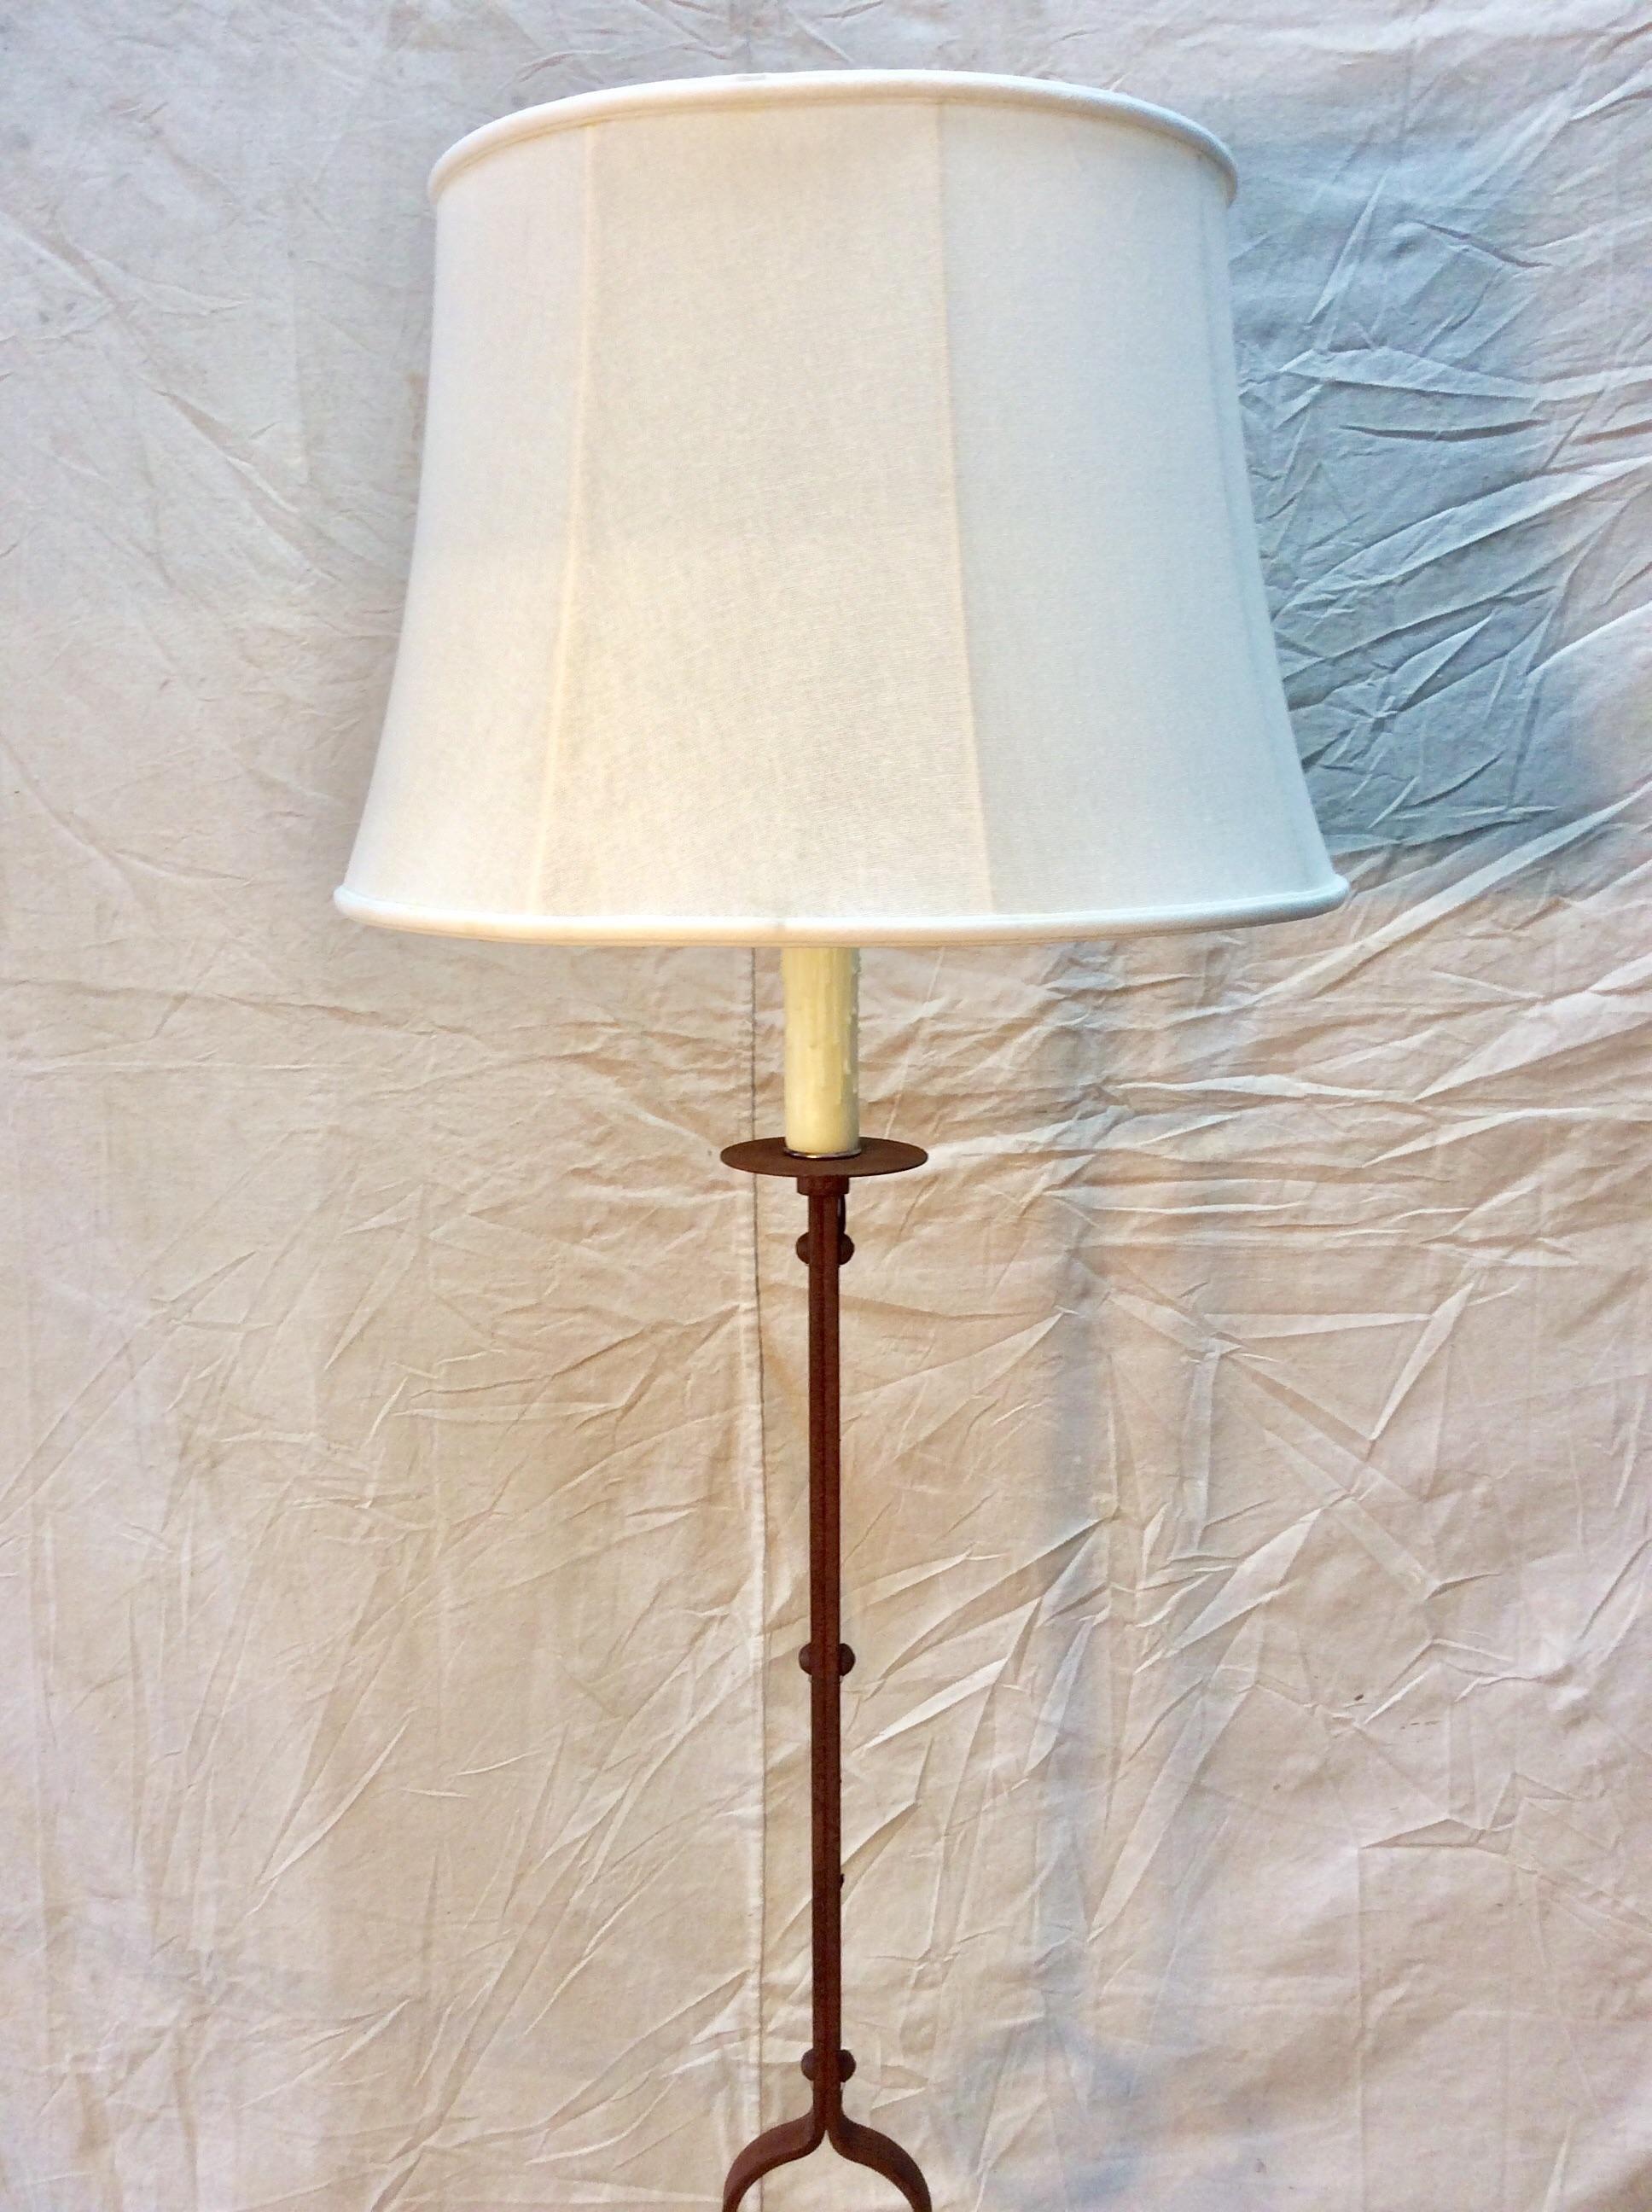 Early 20th Century French Iron Floor Lamp In Good Condition For Sale In Burton, TX